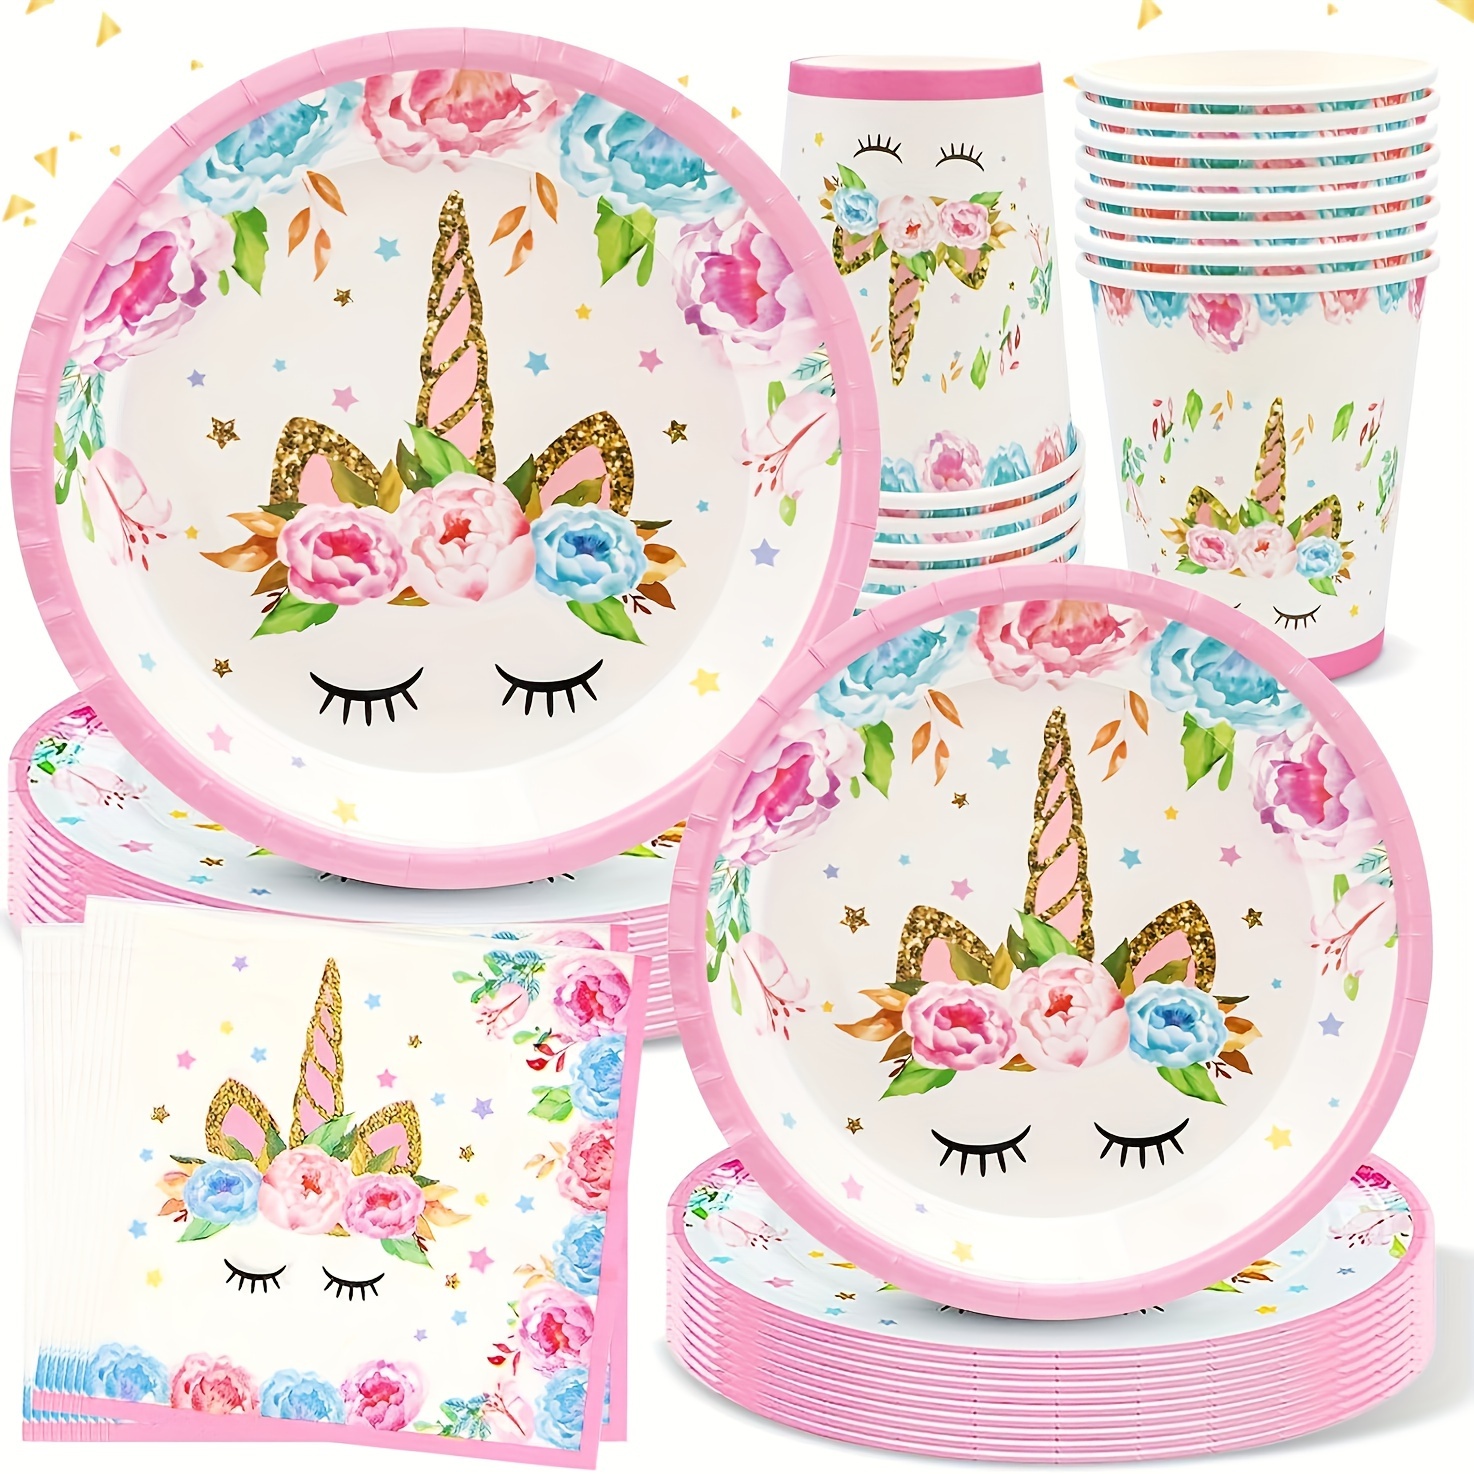 

64-piece Birthday Party Set - Includes Plates, Cups & Napkins For Magical Celebrations